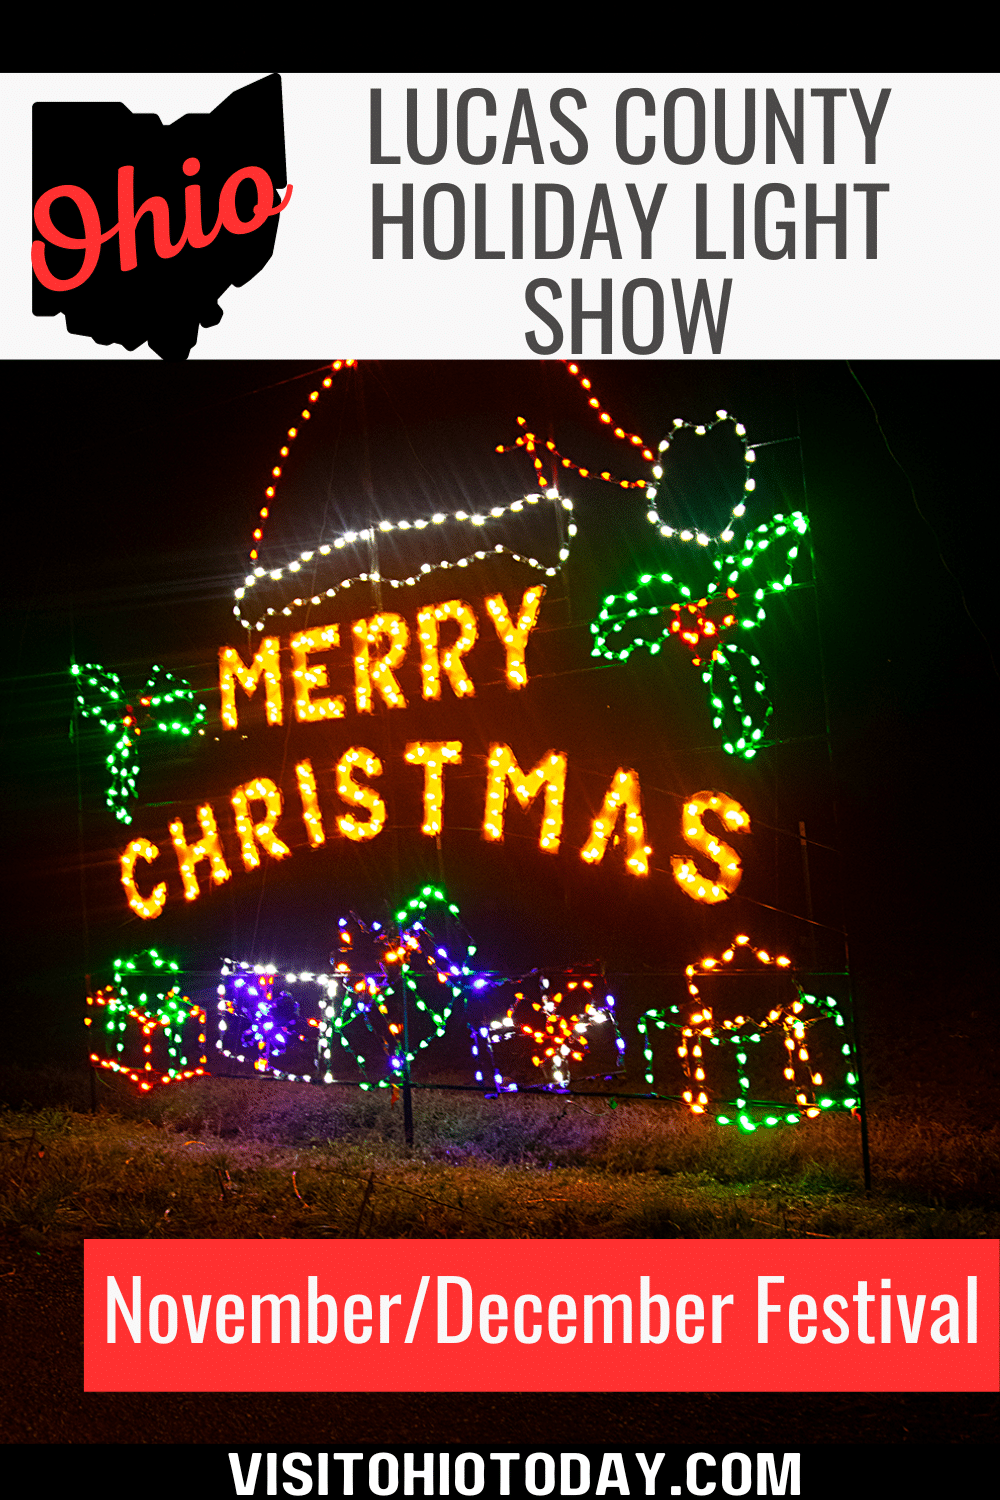 The Lucas County Holiday Light Show is a drive-thru light display event that takes place from mid-November through the end of December in Maumee Ohio at the Lucas County Fairgrounds.